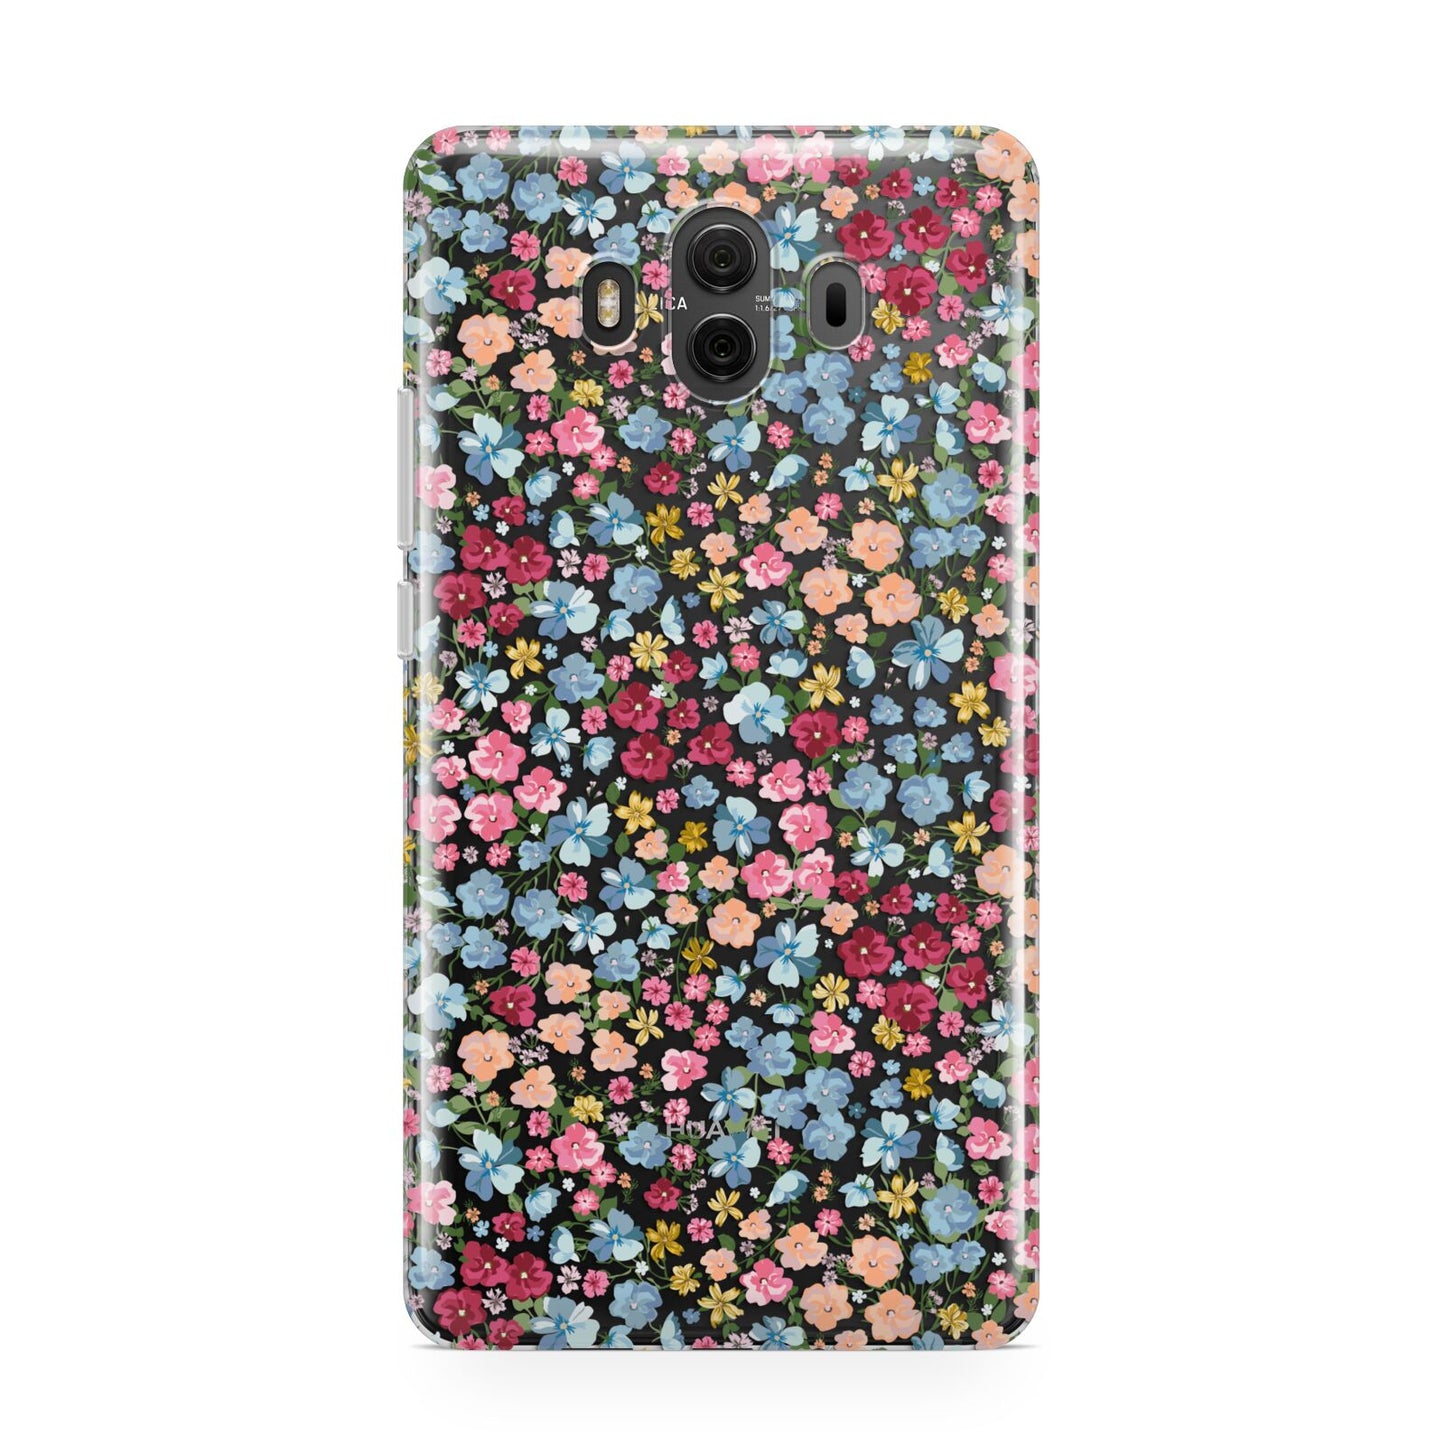 Floral Meadow Huawei Mate 10 Protective Phone Case